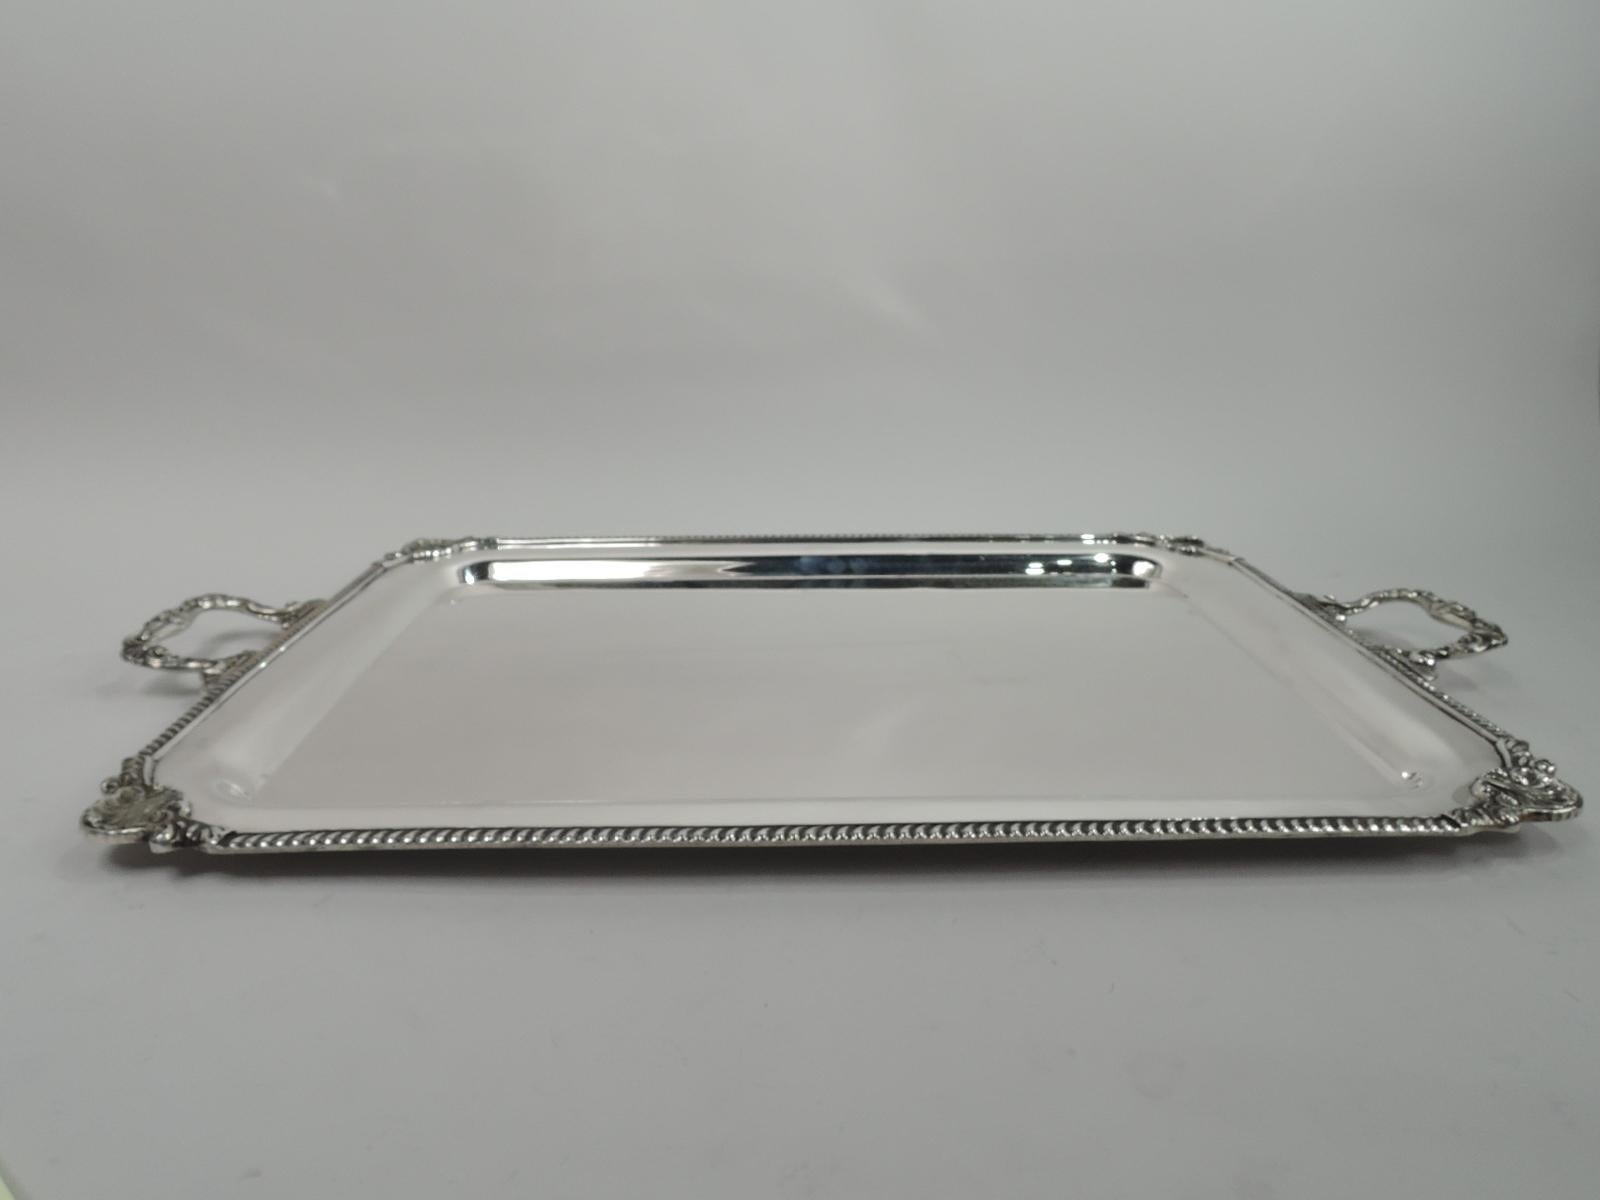 Georgian-style sterling silver tea tray. Rectangular with curved corners. Gadrooned rim with corner shells. Scroll, shell and leaf bracket end handles. Old fashioned with enough heft to support Grandma’s set. Fully marked with stamp for Durham, a